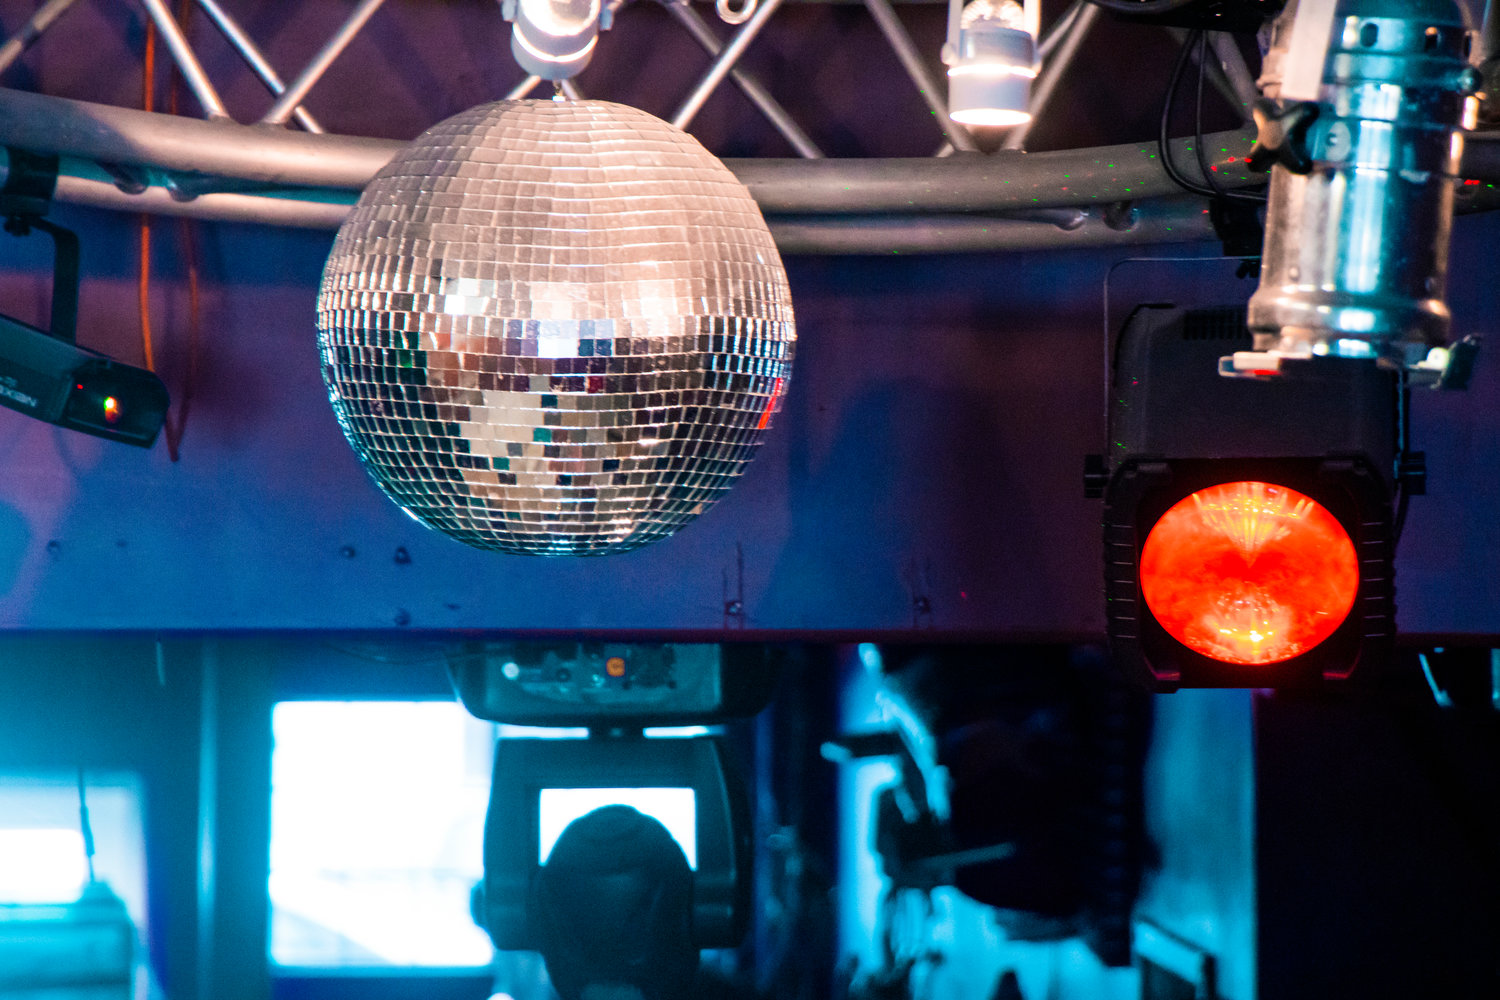 A disco ball and lights hang from the ceiling inside Insert Coin in Centralia.